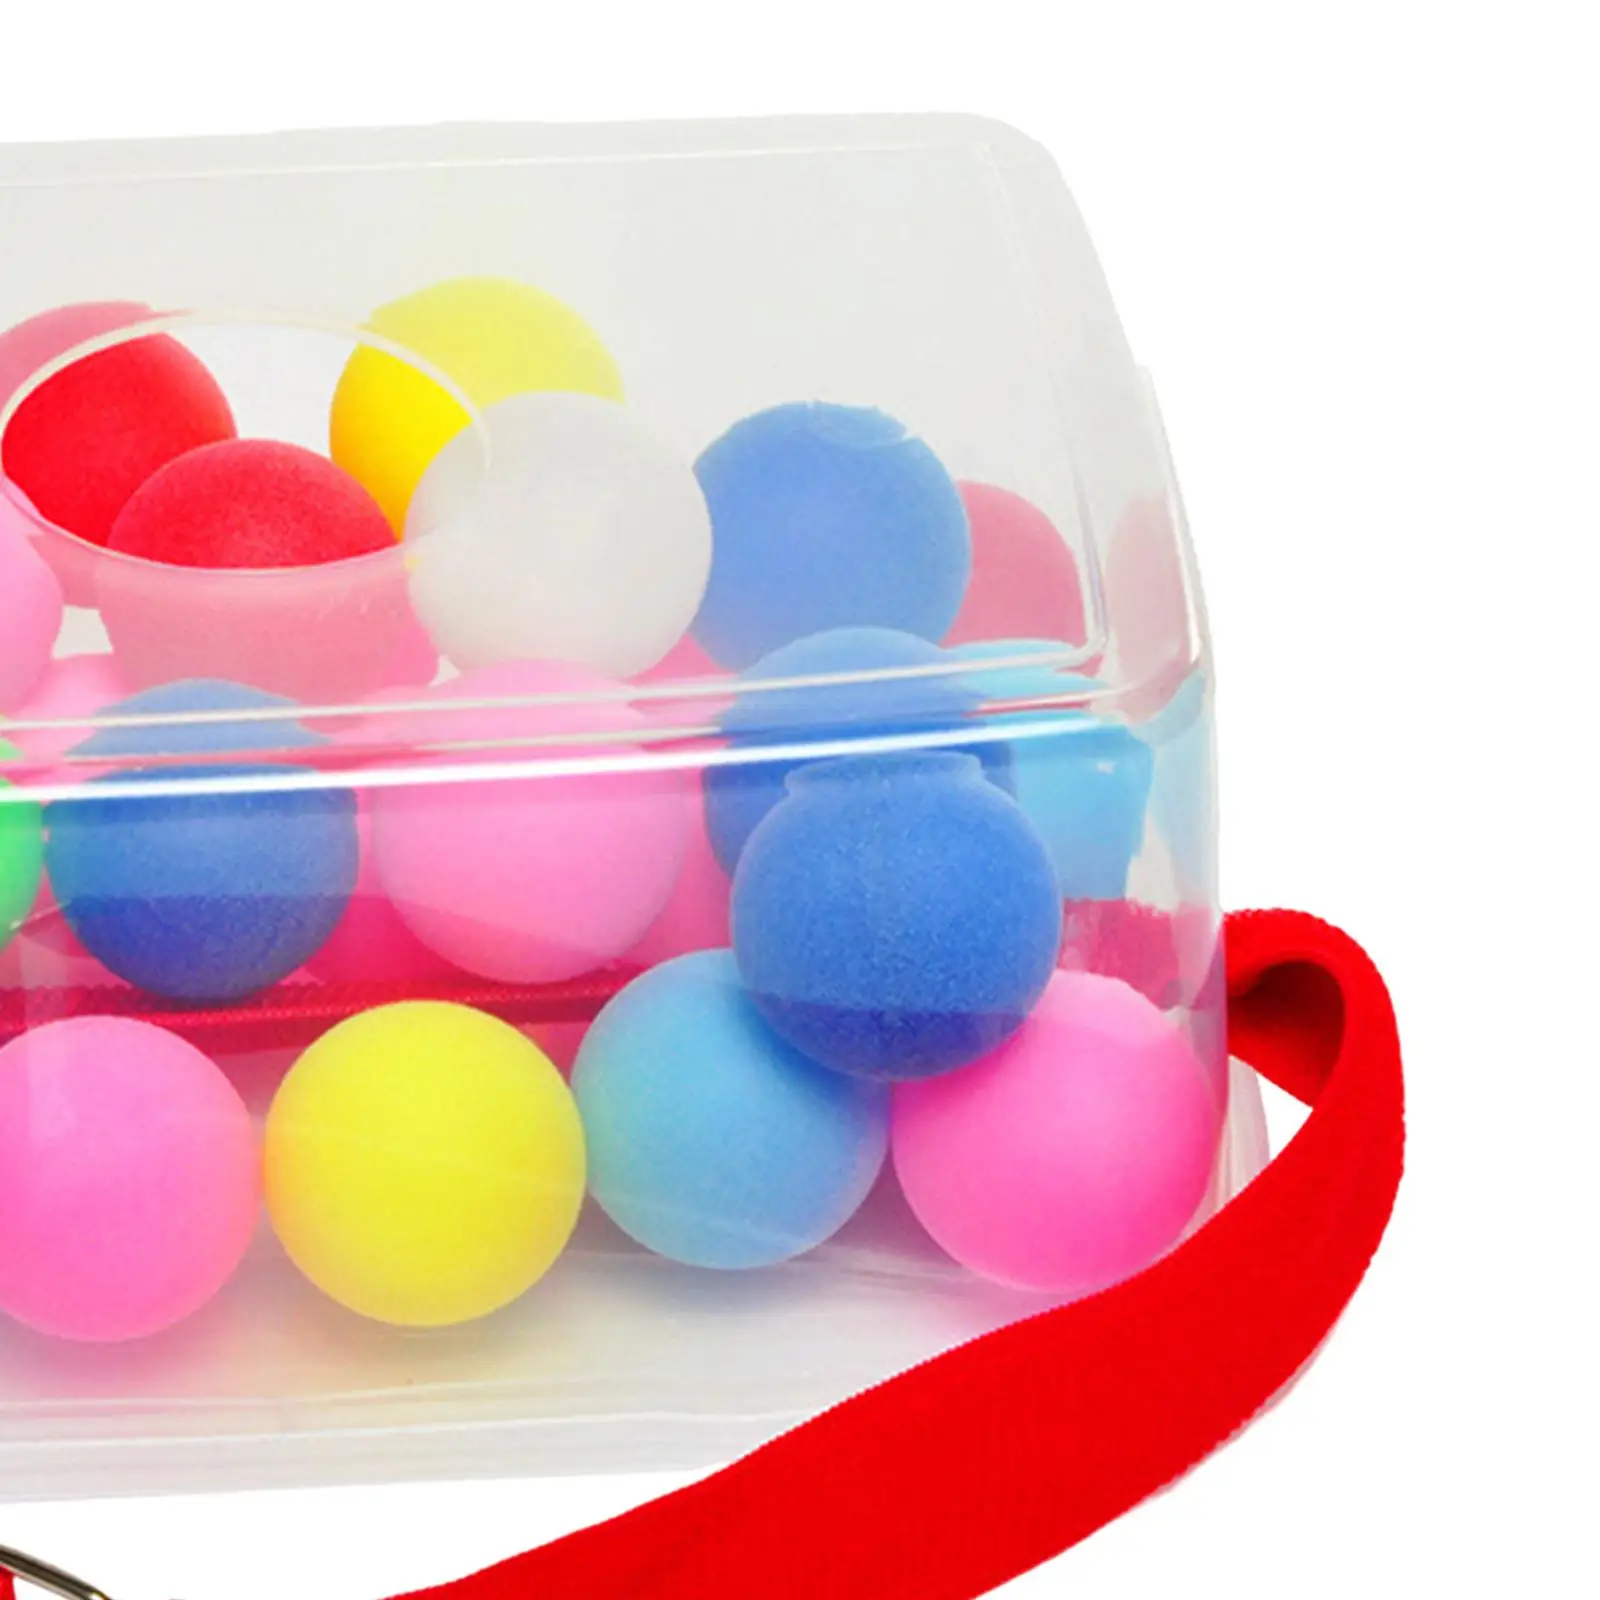 Shaking Swing Balls Game set Competition Toys Kids Party Games Swing Balls Game with 30 Ball for Party Game Outdoors Adults Kids